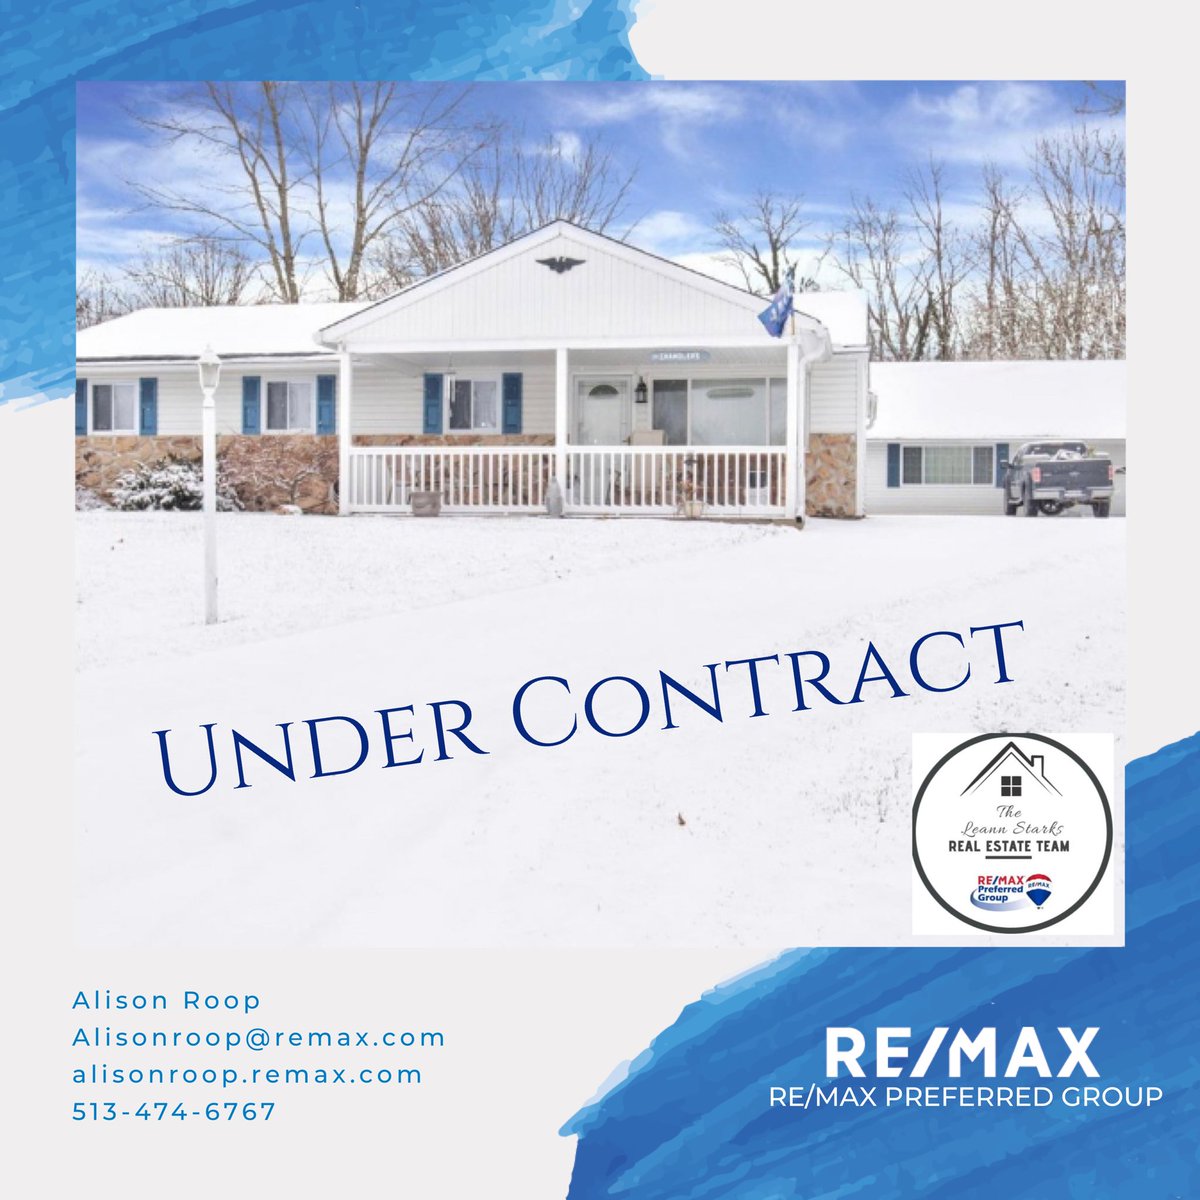 From hitting the market to under contract all in the same day!  Congratulations to our sellers!                                          alisonroop.remax.com
RE/Max Preferred Group
#roopinrealestate 
#CincyRealEstate
#ILoveMyJob
#CincinnatiRealEstate
#roopthereitis